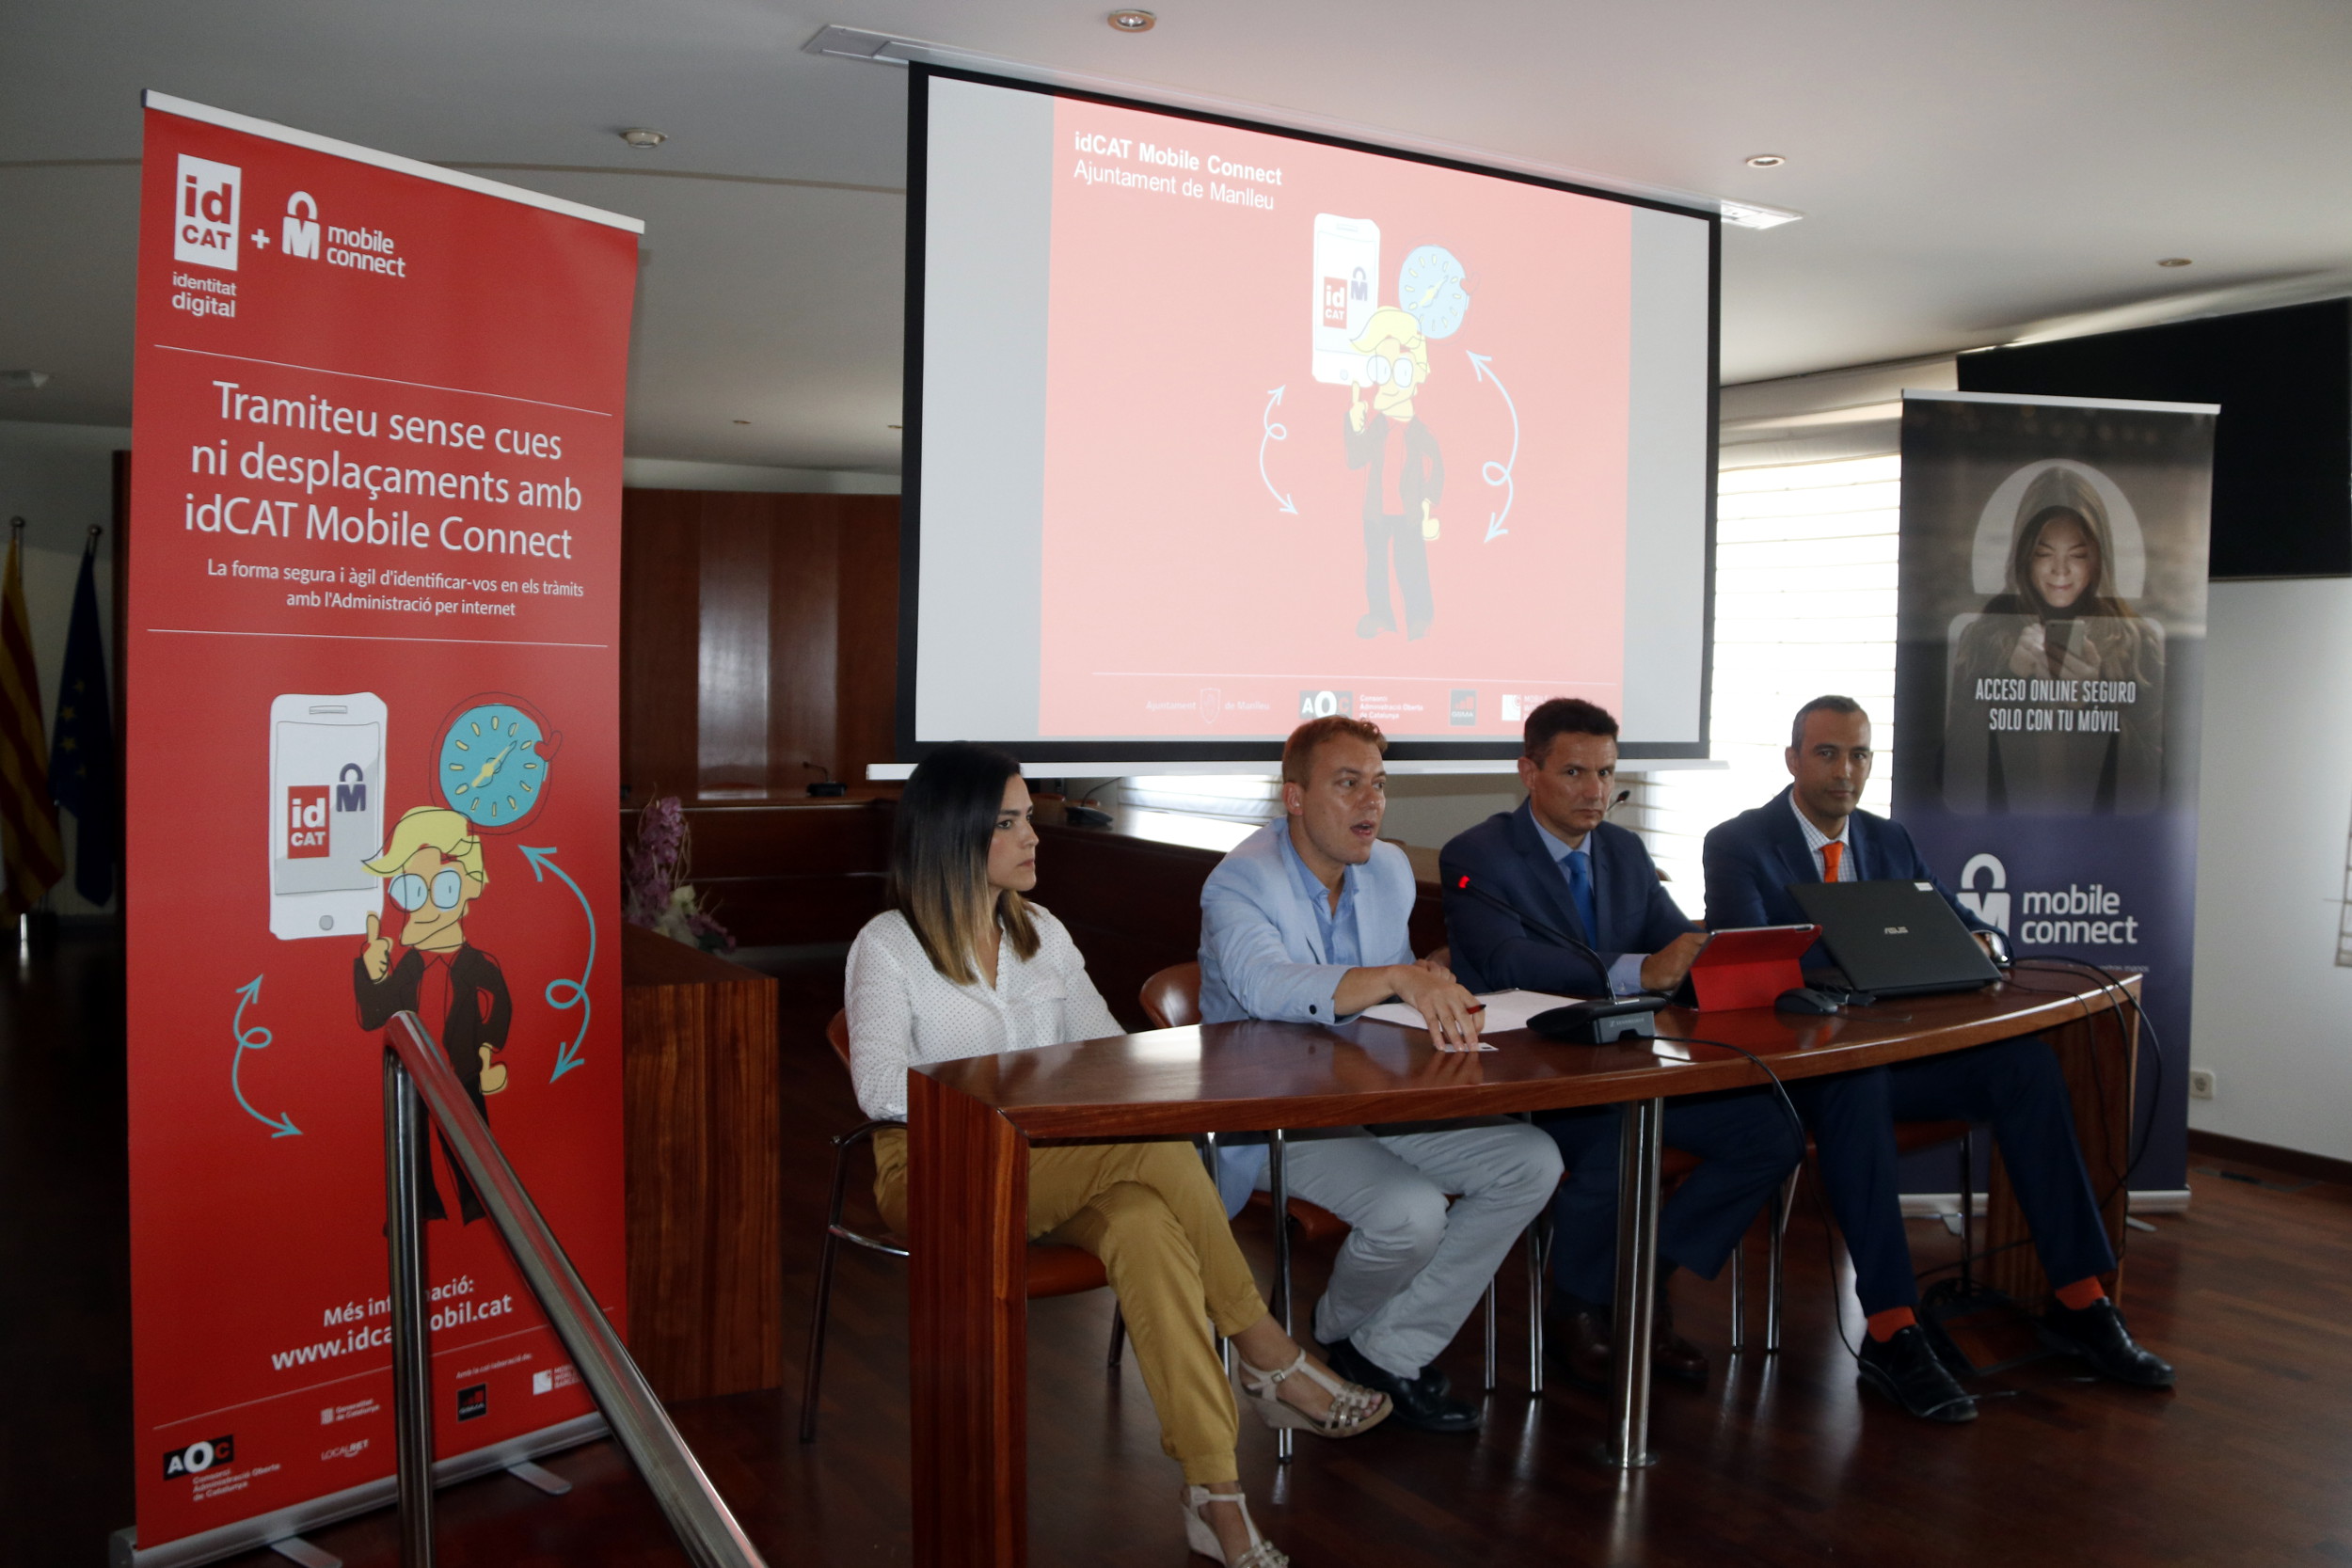 Representatives of the AOC, Manlleu Town Hall, GSMA, Movistar, Vodafone, and Orange present idCAT Mobile Connect (by ACN)